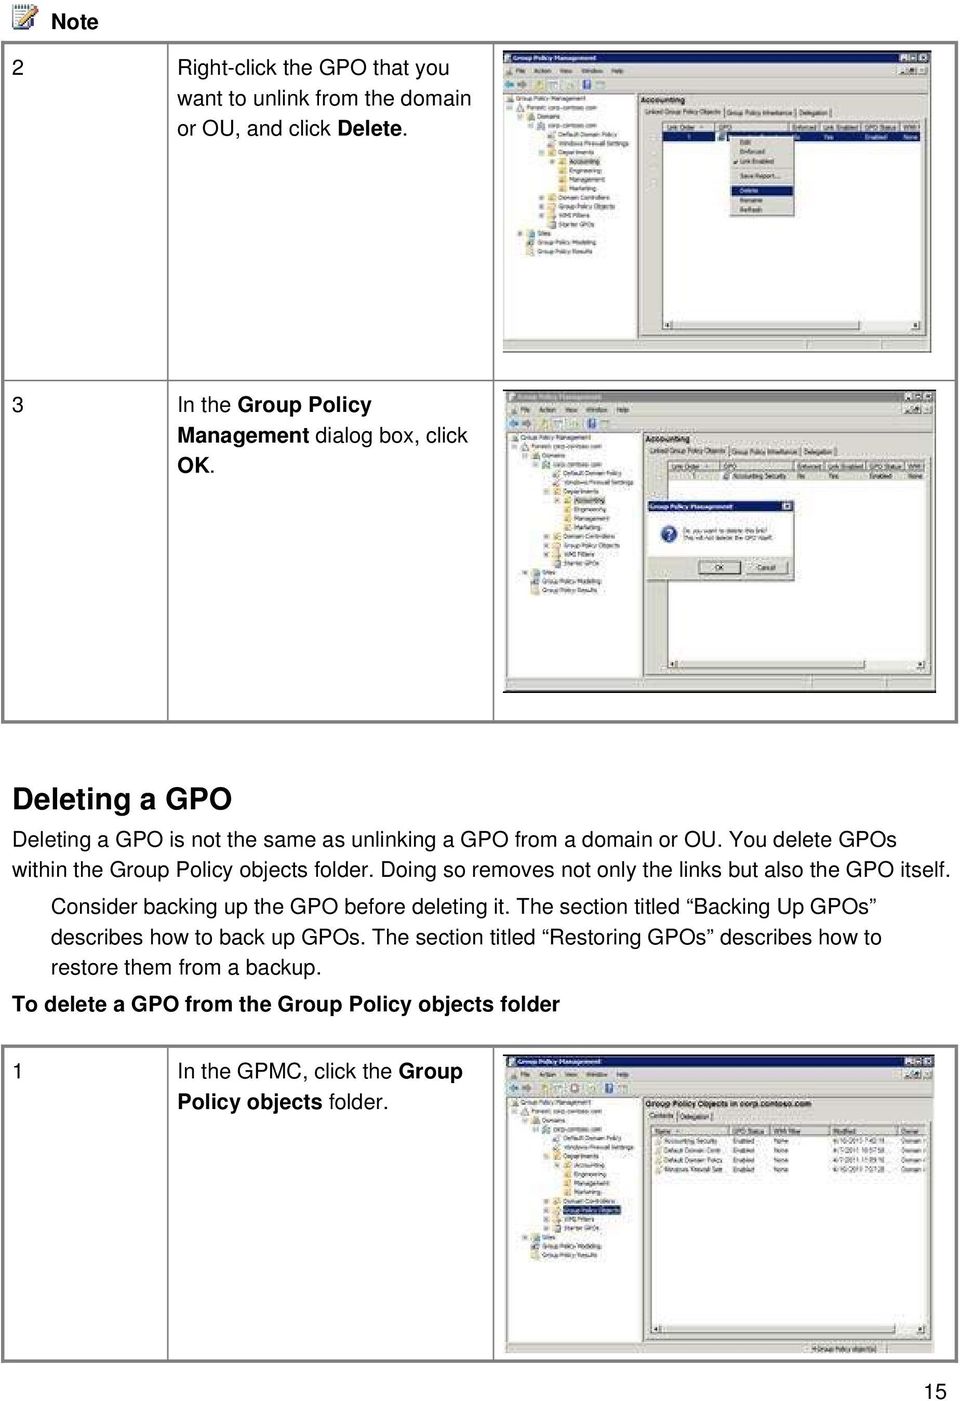 Doing so removes not only the links but also the GPO itself. Consider backing up the GPO before deleting it.